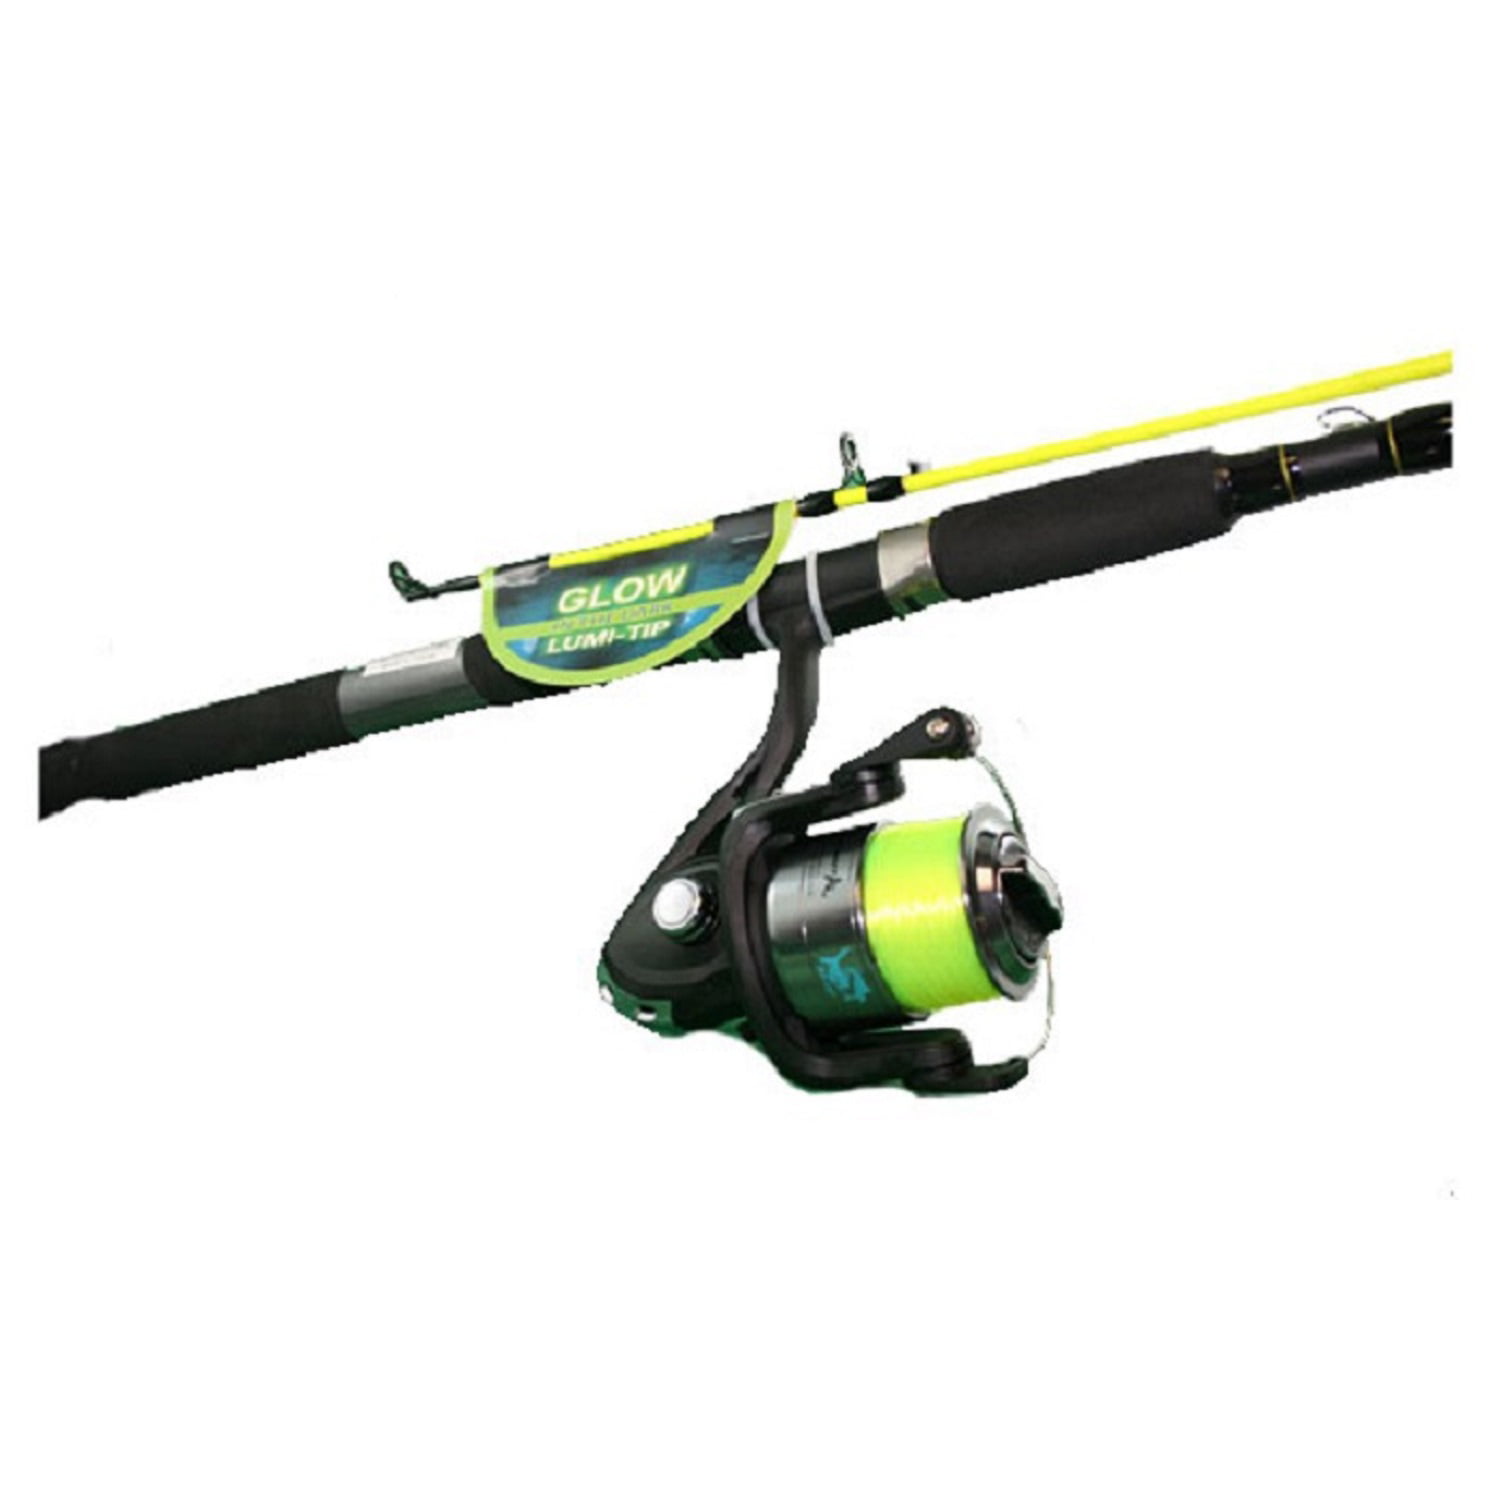 Ardent Super Duty Combo, 7'6 MH Rod, 5000 Spinning 